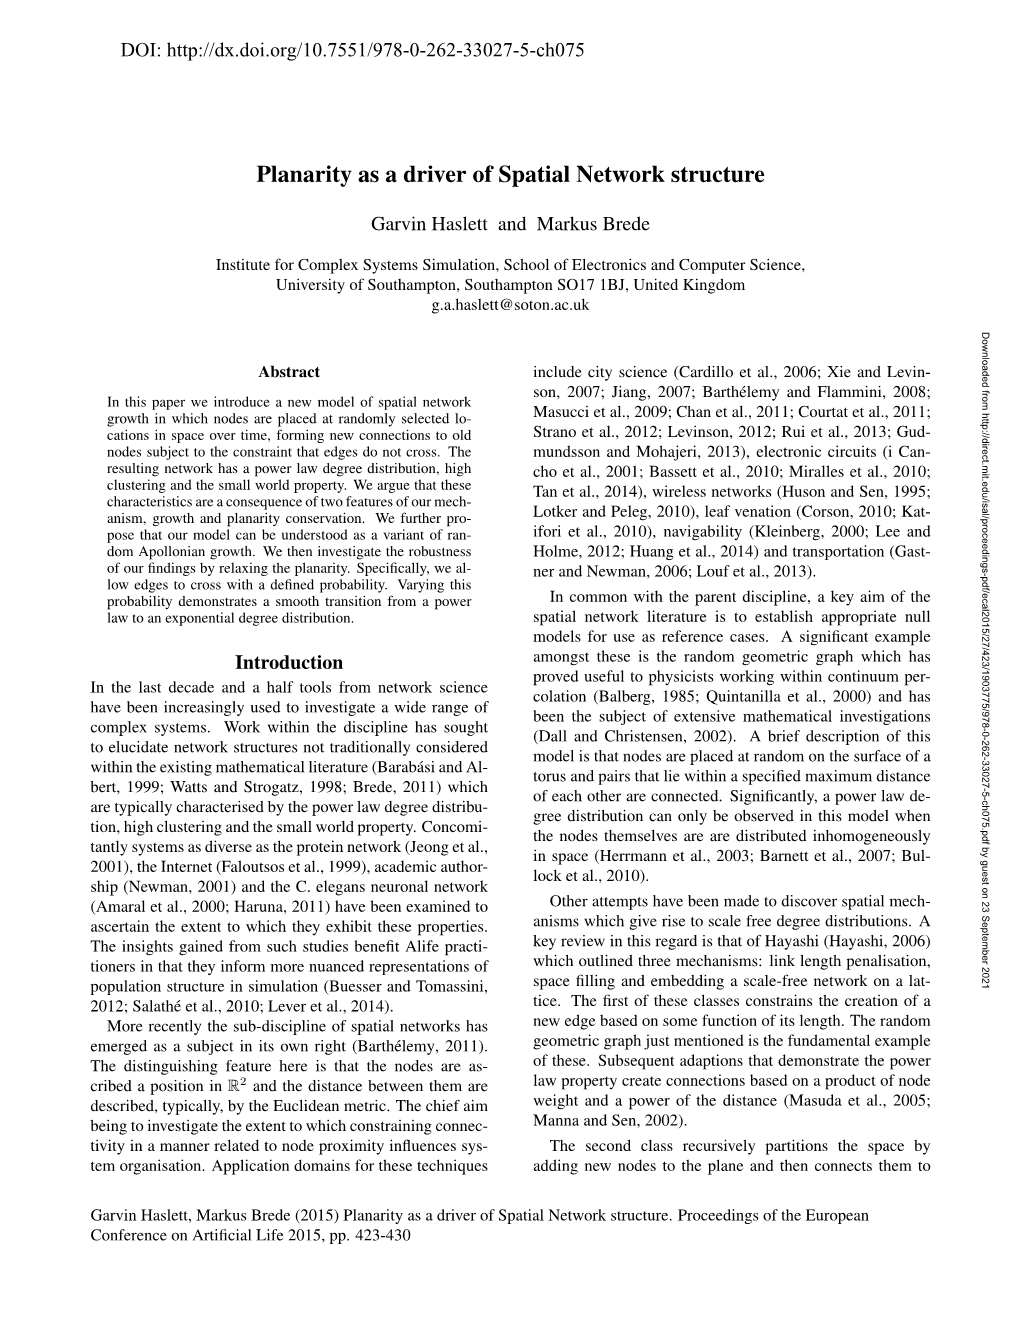 Planarity As a Driver of Spatial Network Structure